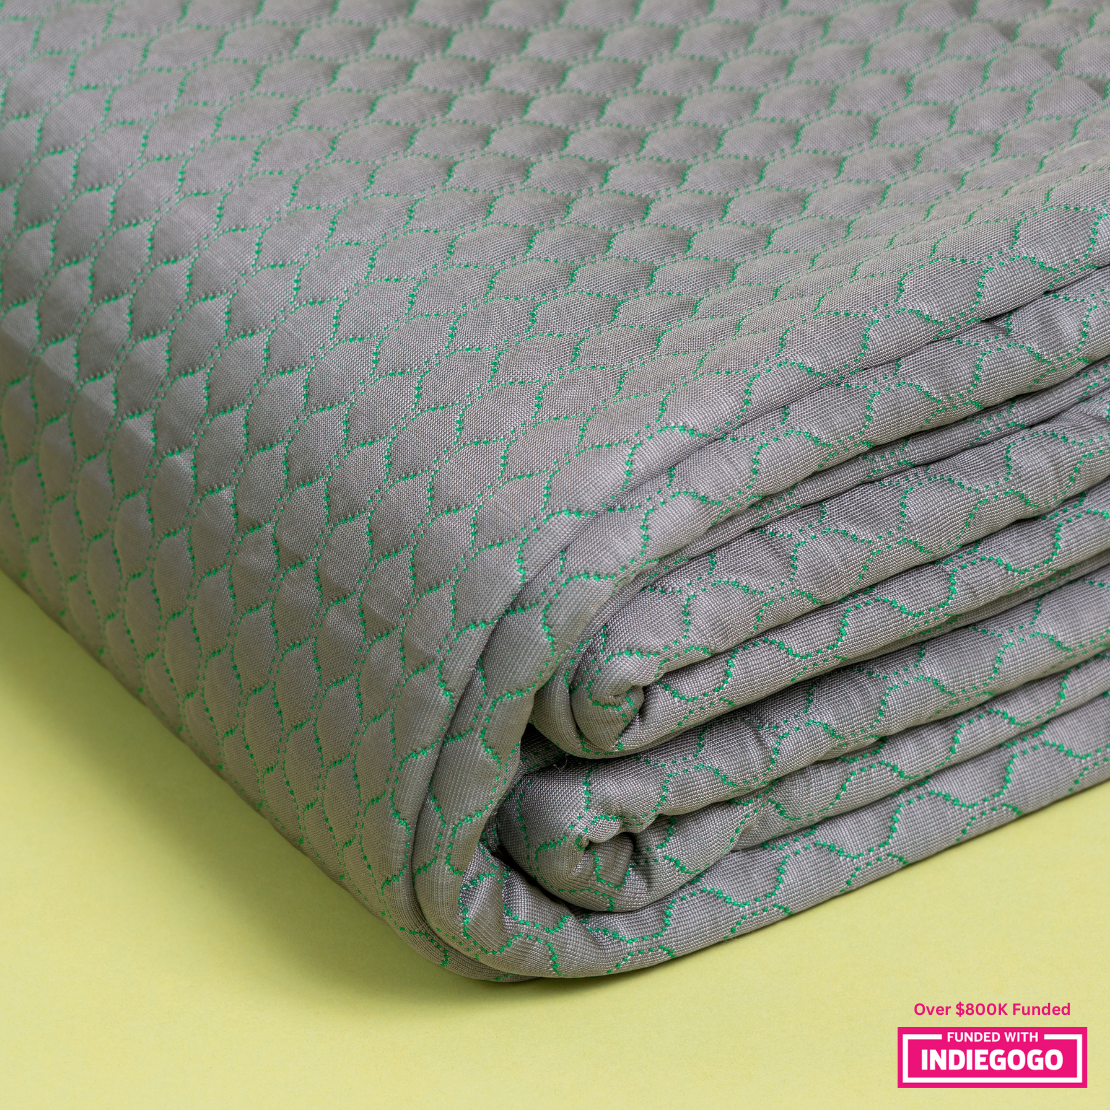 A close-up view of a textured, light gray blanket with a unique diamond pattern stitched in green thread. The blanket is neatly folded, showcasing its plush thickness against a soft yellow background.